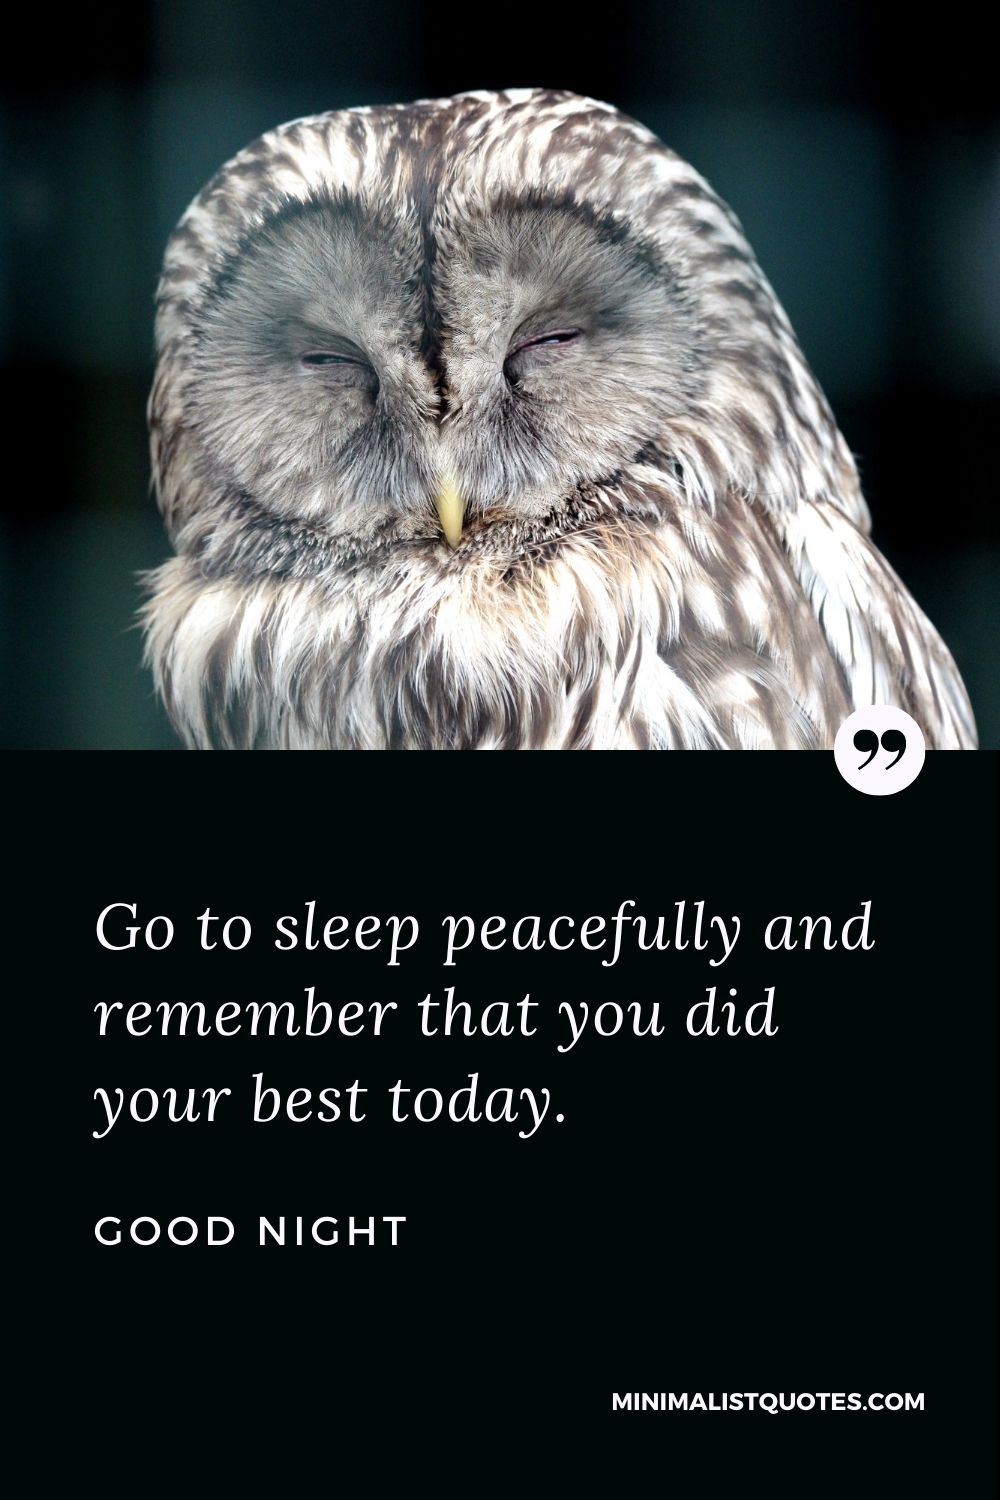 Good Night Wishes - Go to sleep peacefully and remember that you did your best today.